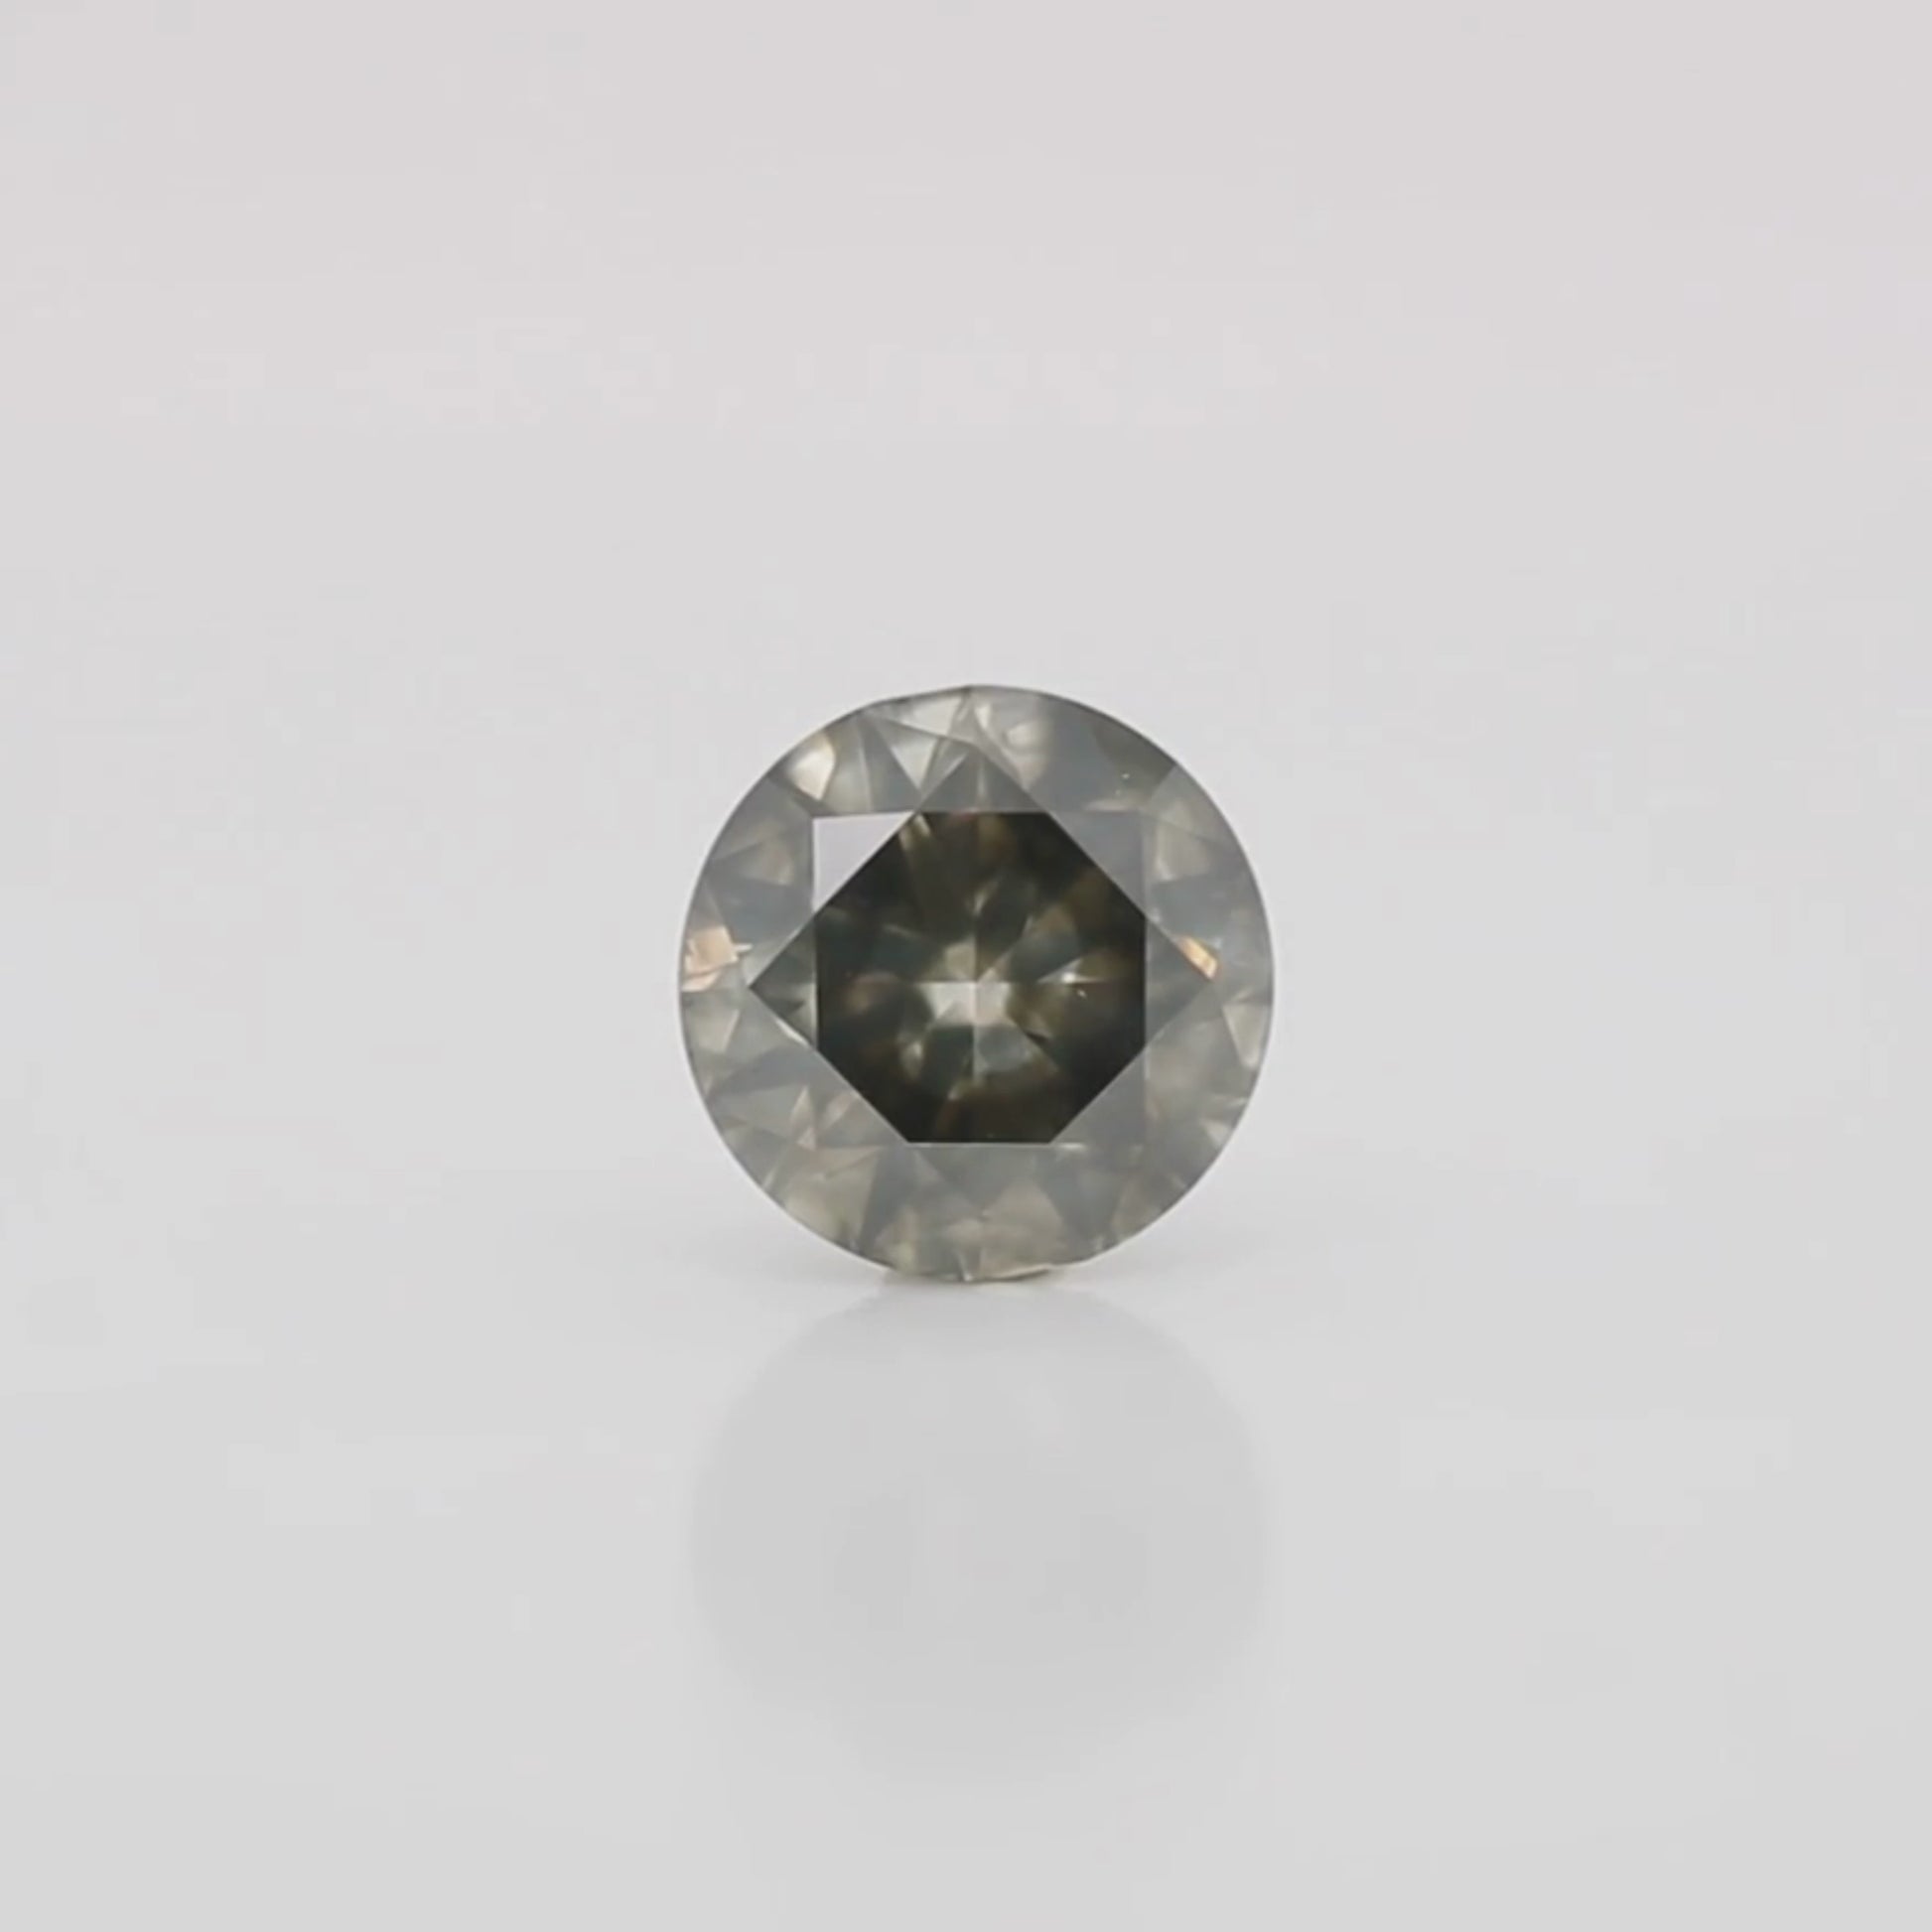 3.05 Carat Round Champagne Brown Salt and Pepper Diamond for Custom Work - Inventory Code SCR305